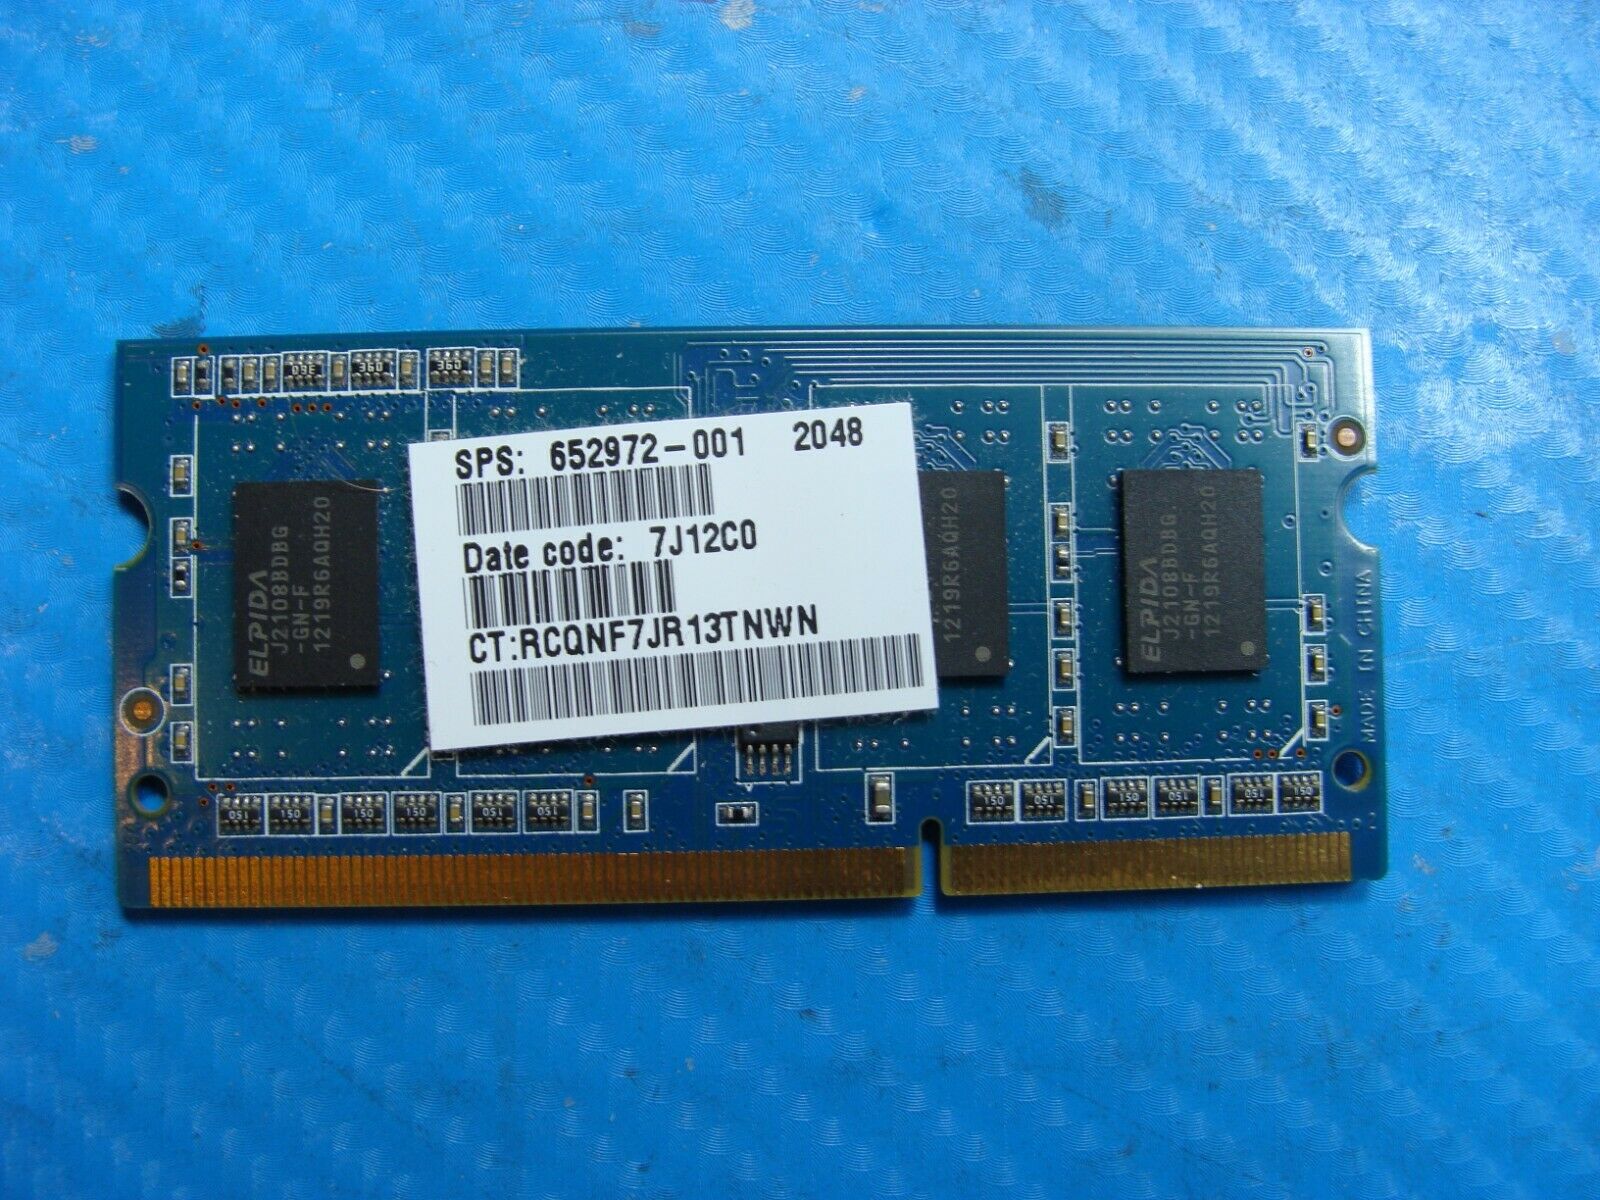 HP m6-1205dx RAMAXEL 2GB 1Rx8 SO-DIMM Memory RAM RMT3150ED58E8W-1600 652972-001 - Laptop Parts - Buy Authentic Computer Parts - Top Seller Ebay